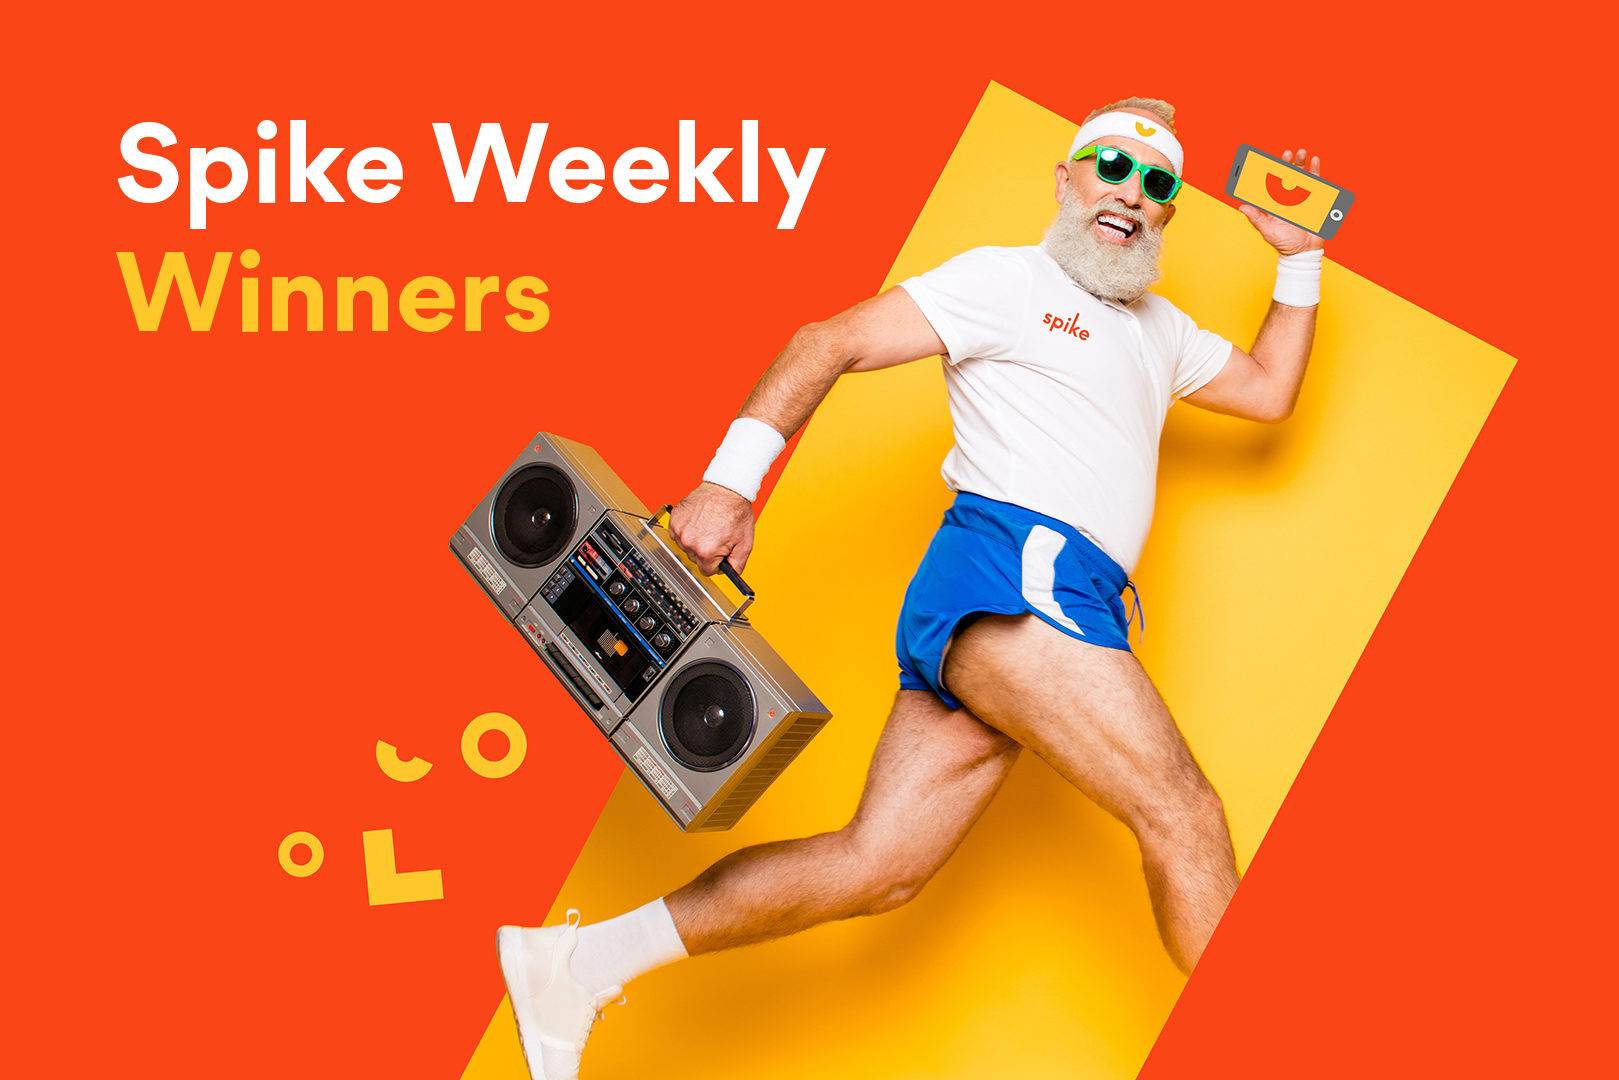 Spike Champion with white beard and sunglasses runs with a boom box